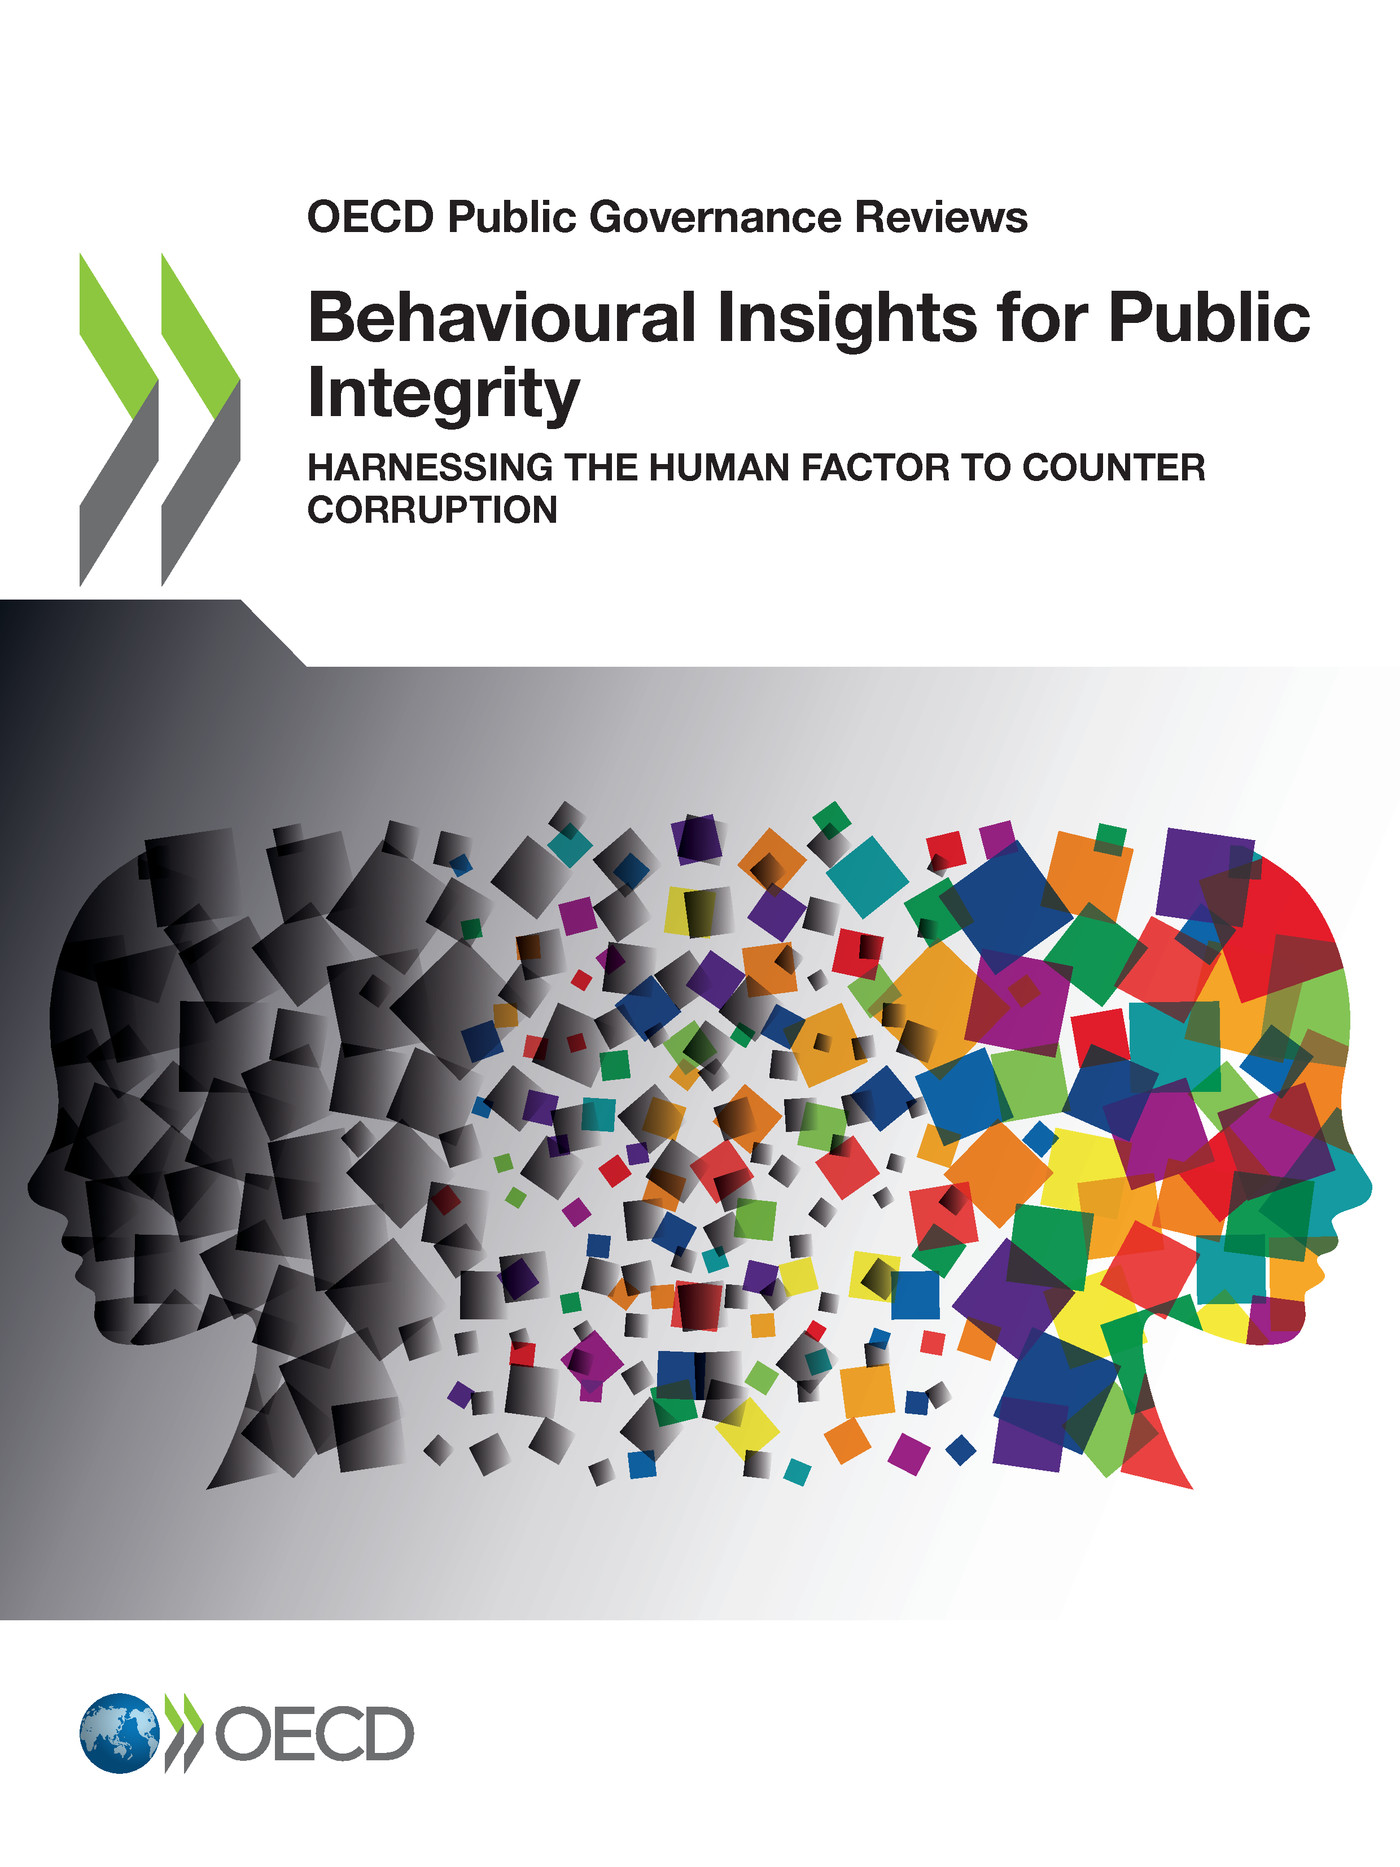 Behavioural Insights for Public Integrity -  Collectif - OCDE / OECD